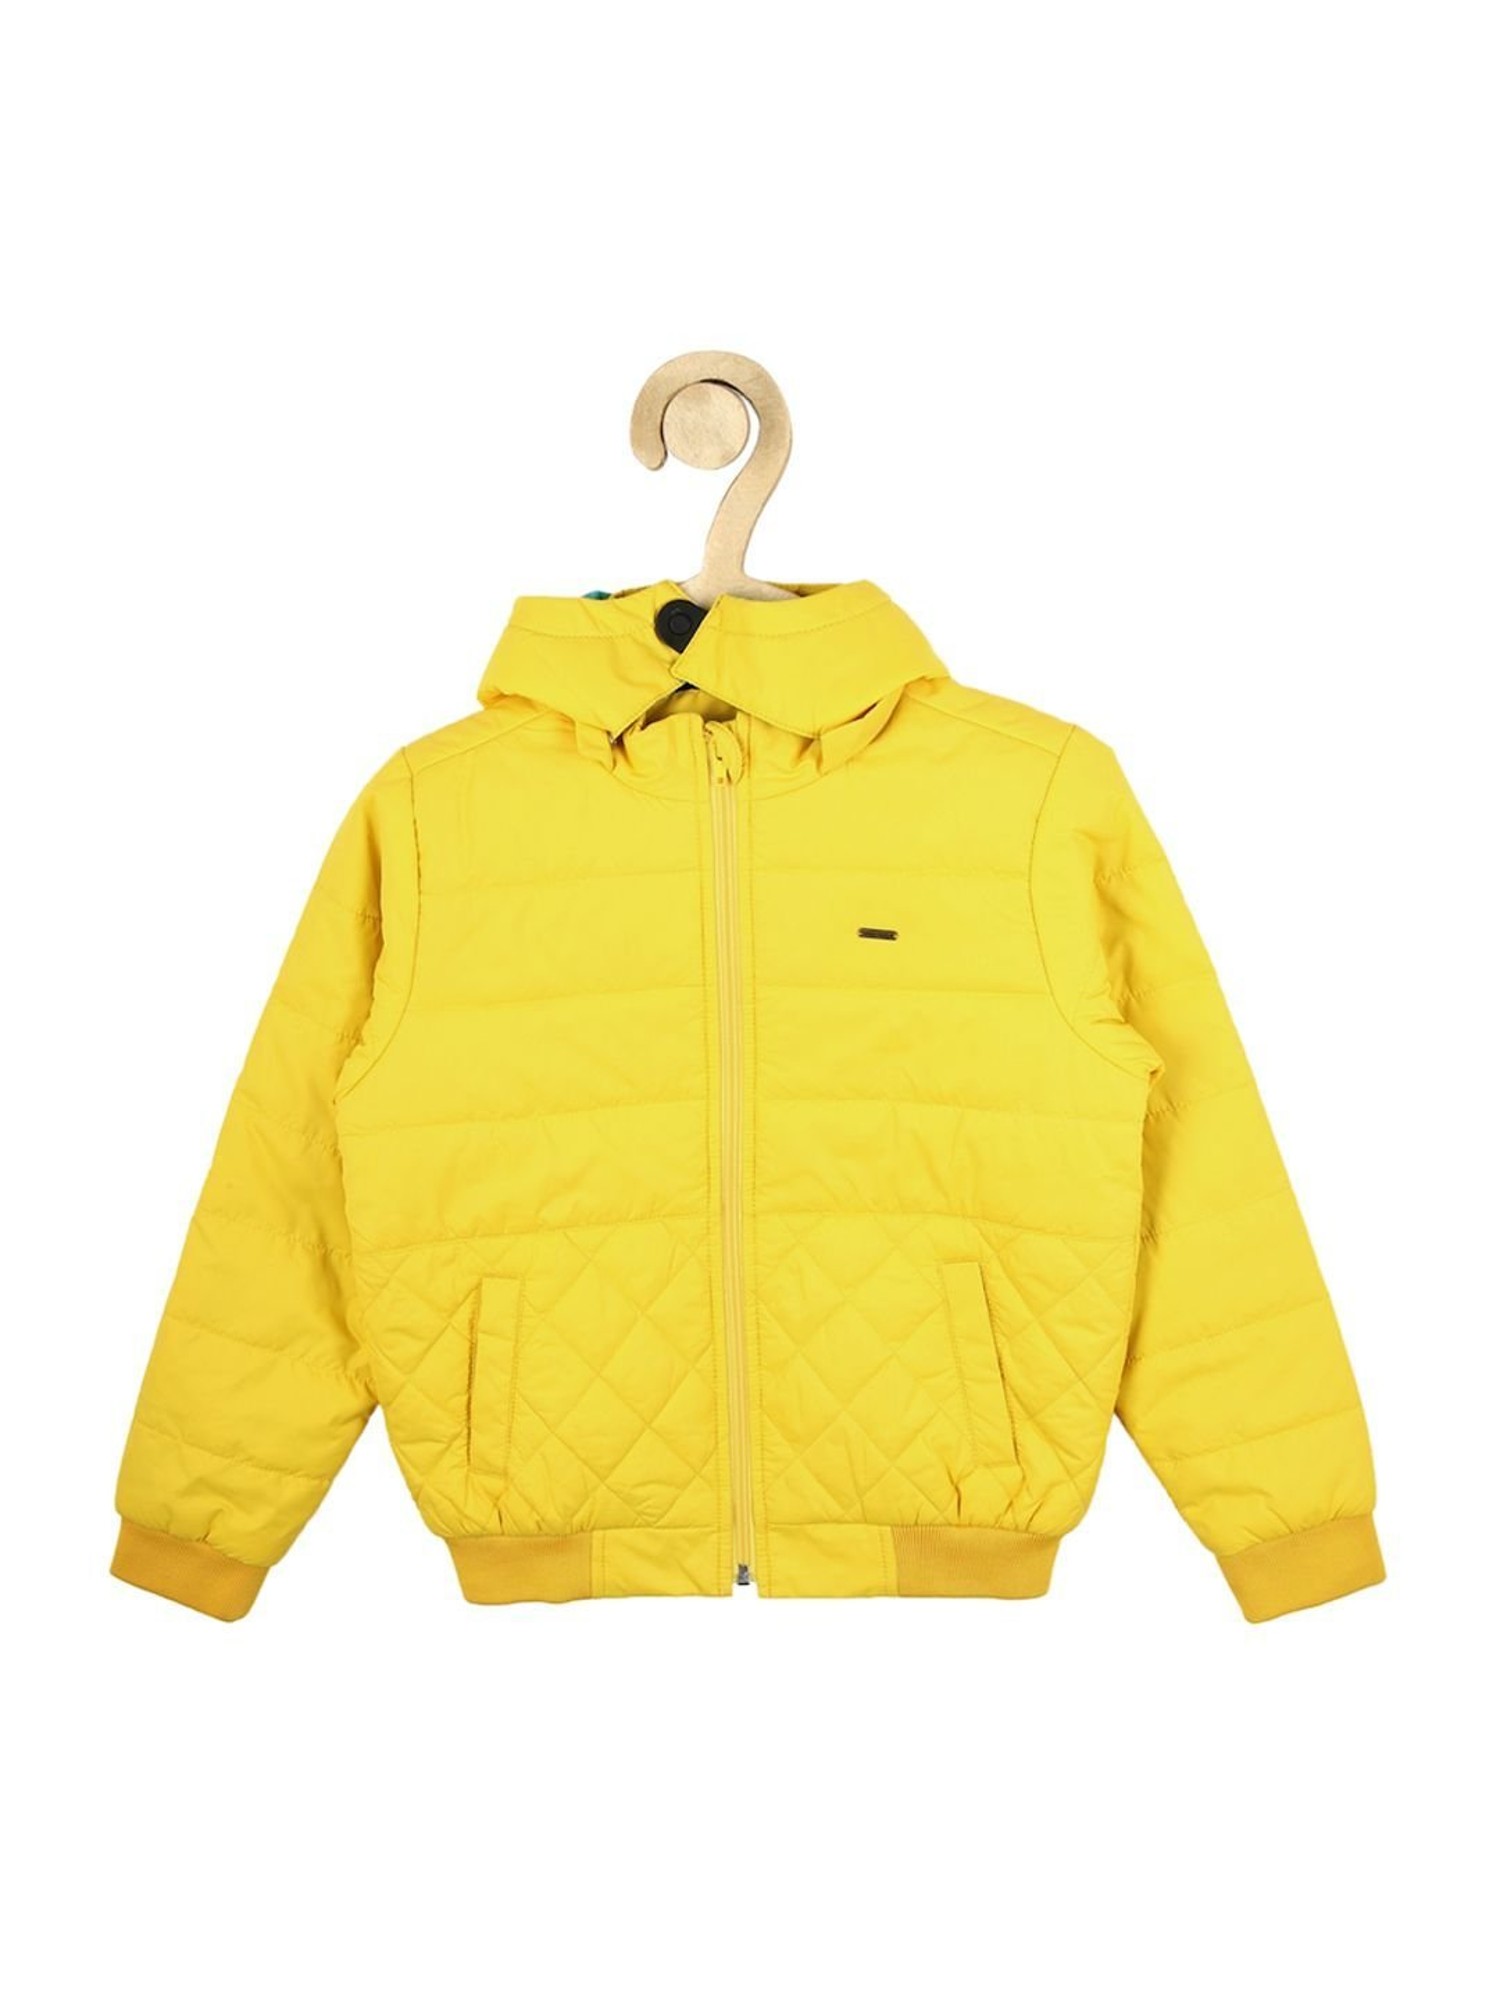 Update more than 59 allen solly kids jacket latest